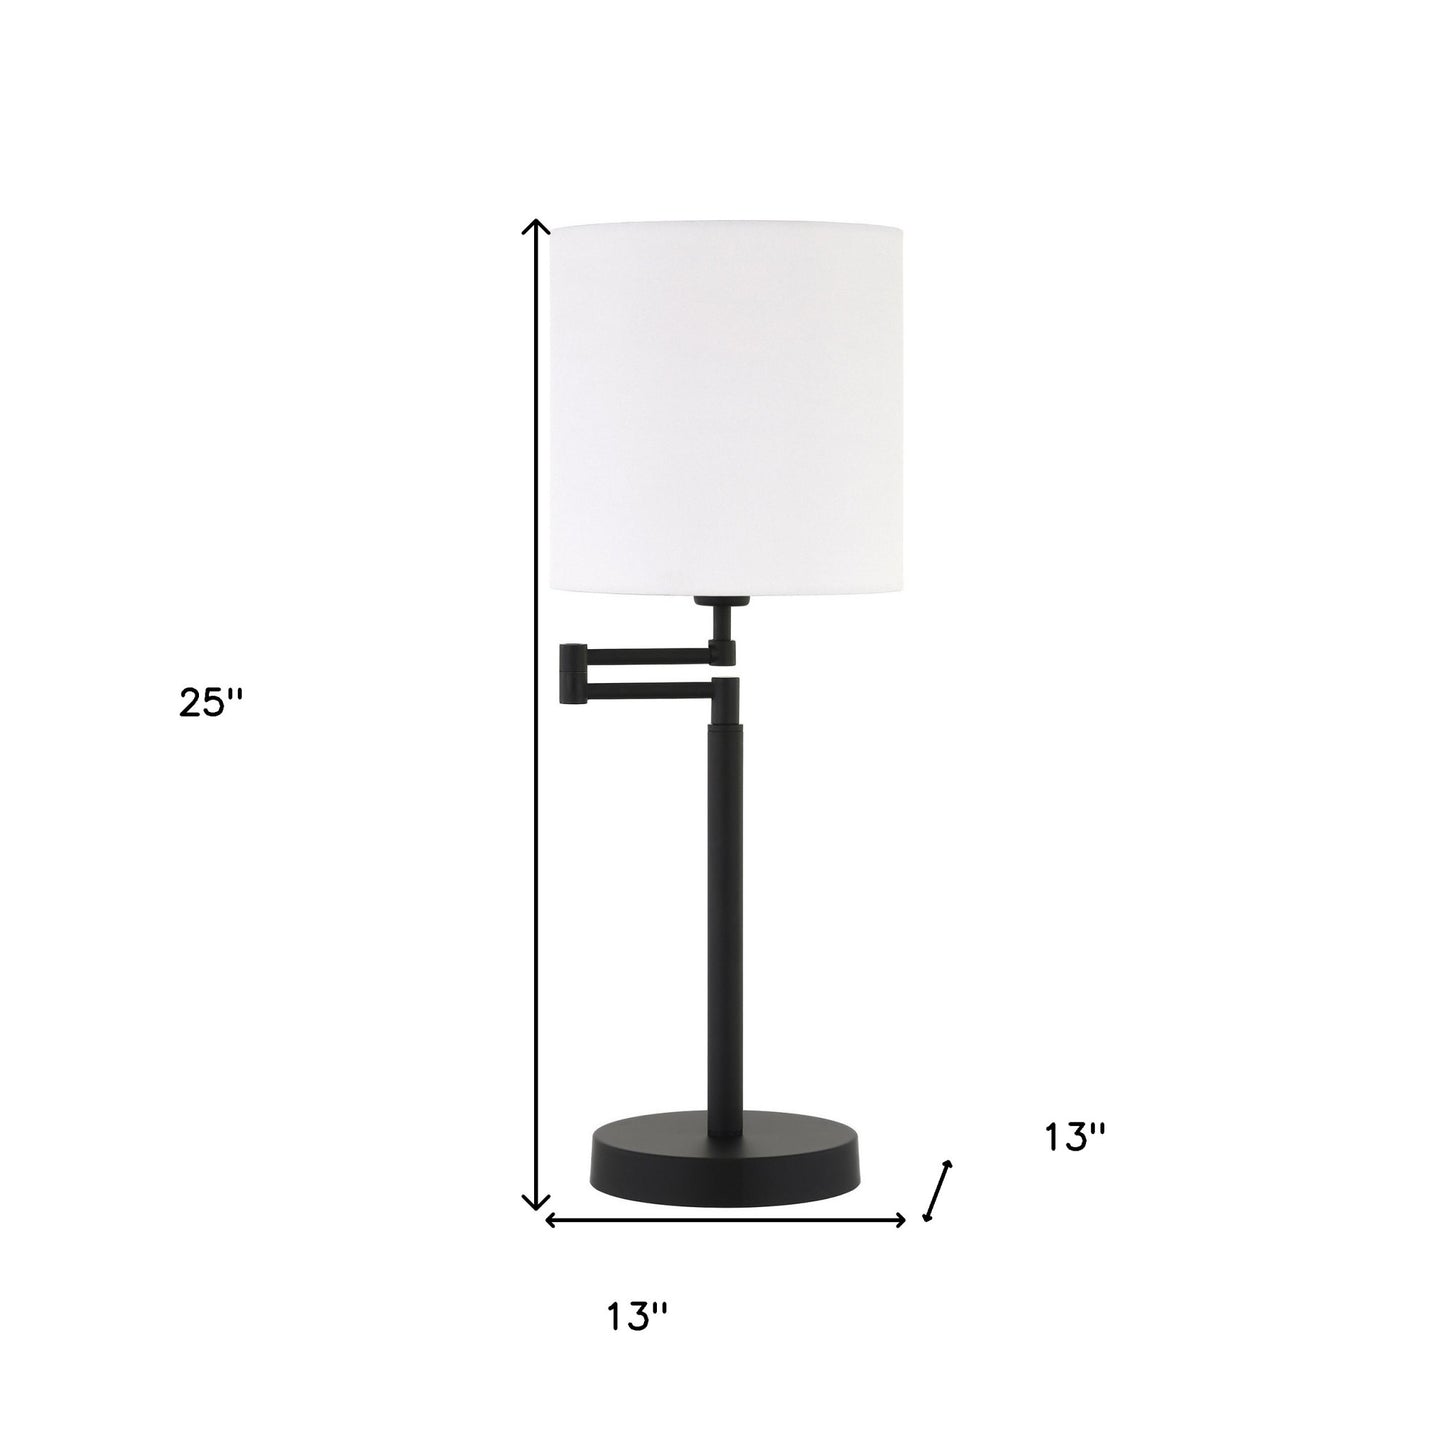 25" Black Metal Table Lamp With White Drum Shade